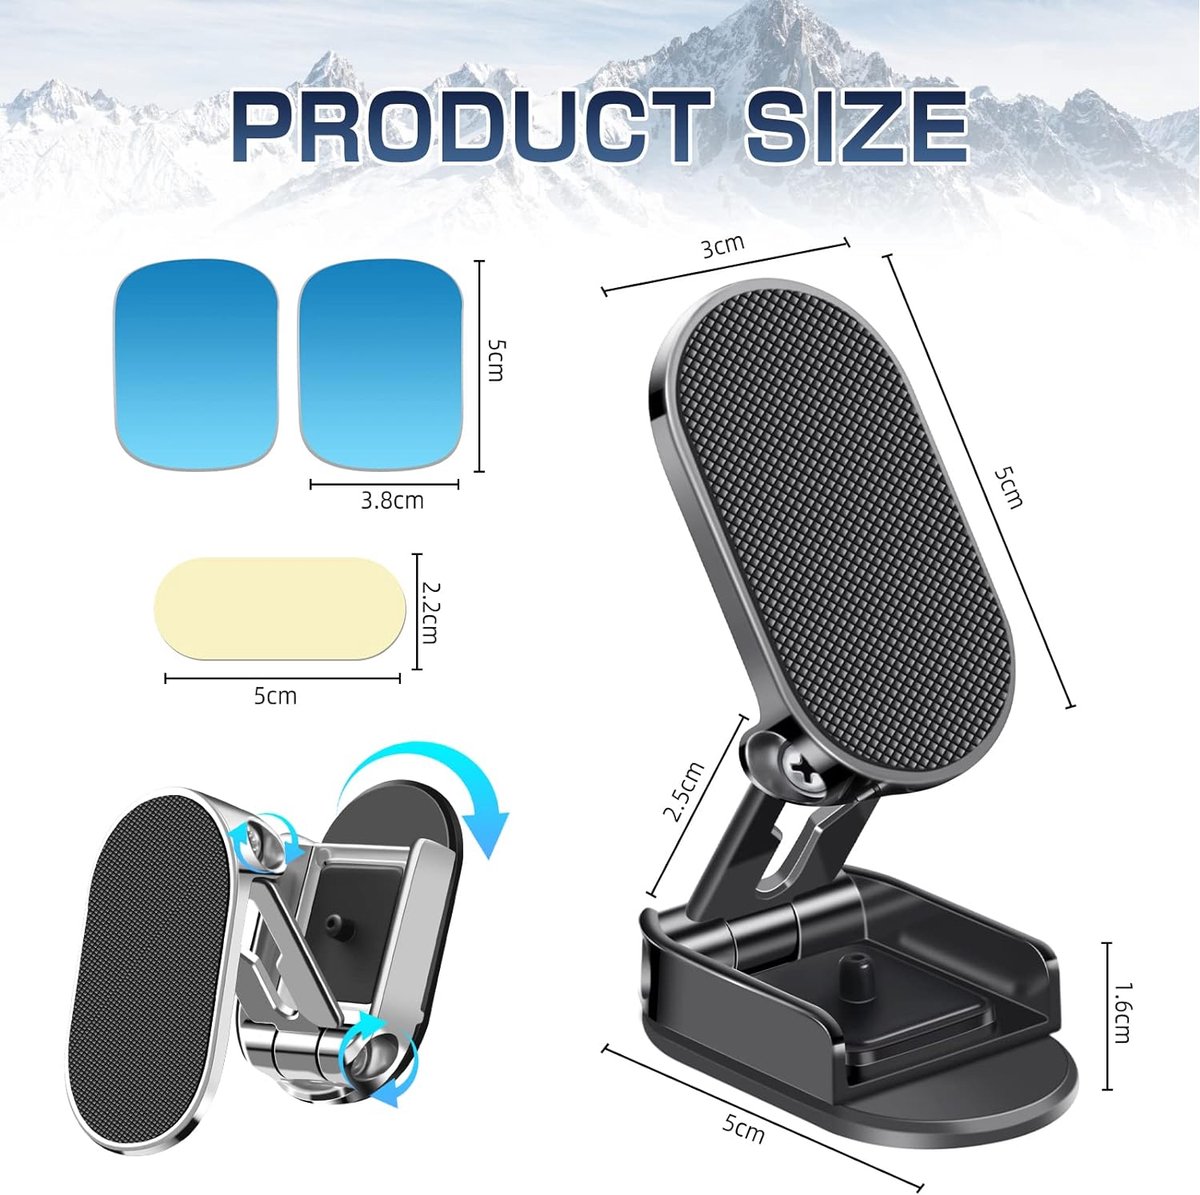 Support Telephone Voiture Aimant Support Voiture Universel,720 Degrs  Rotation Support Phone Avec Aimant Puissant Pour Iphone Samsung, Huawei  Smartphon